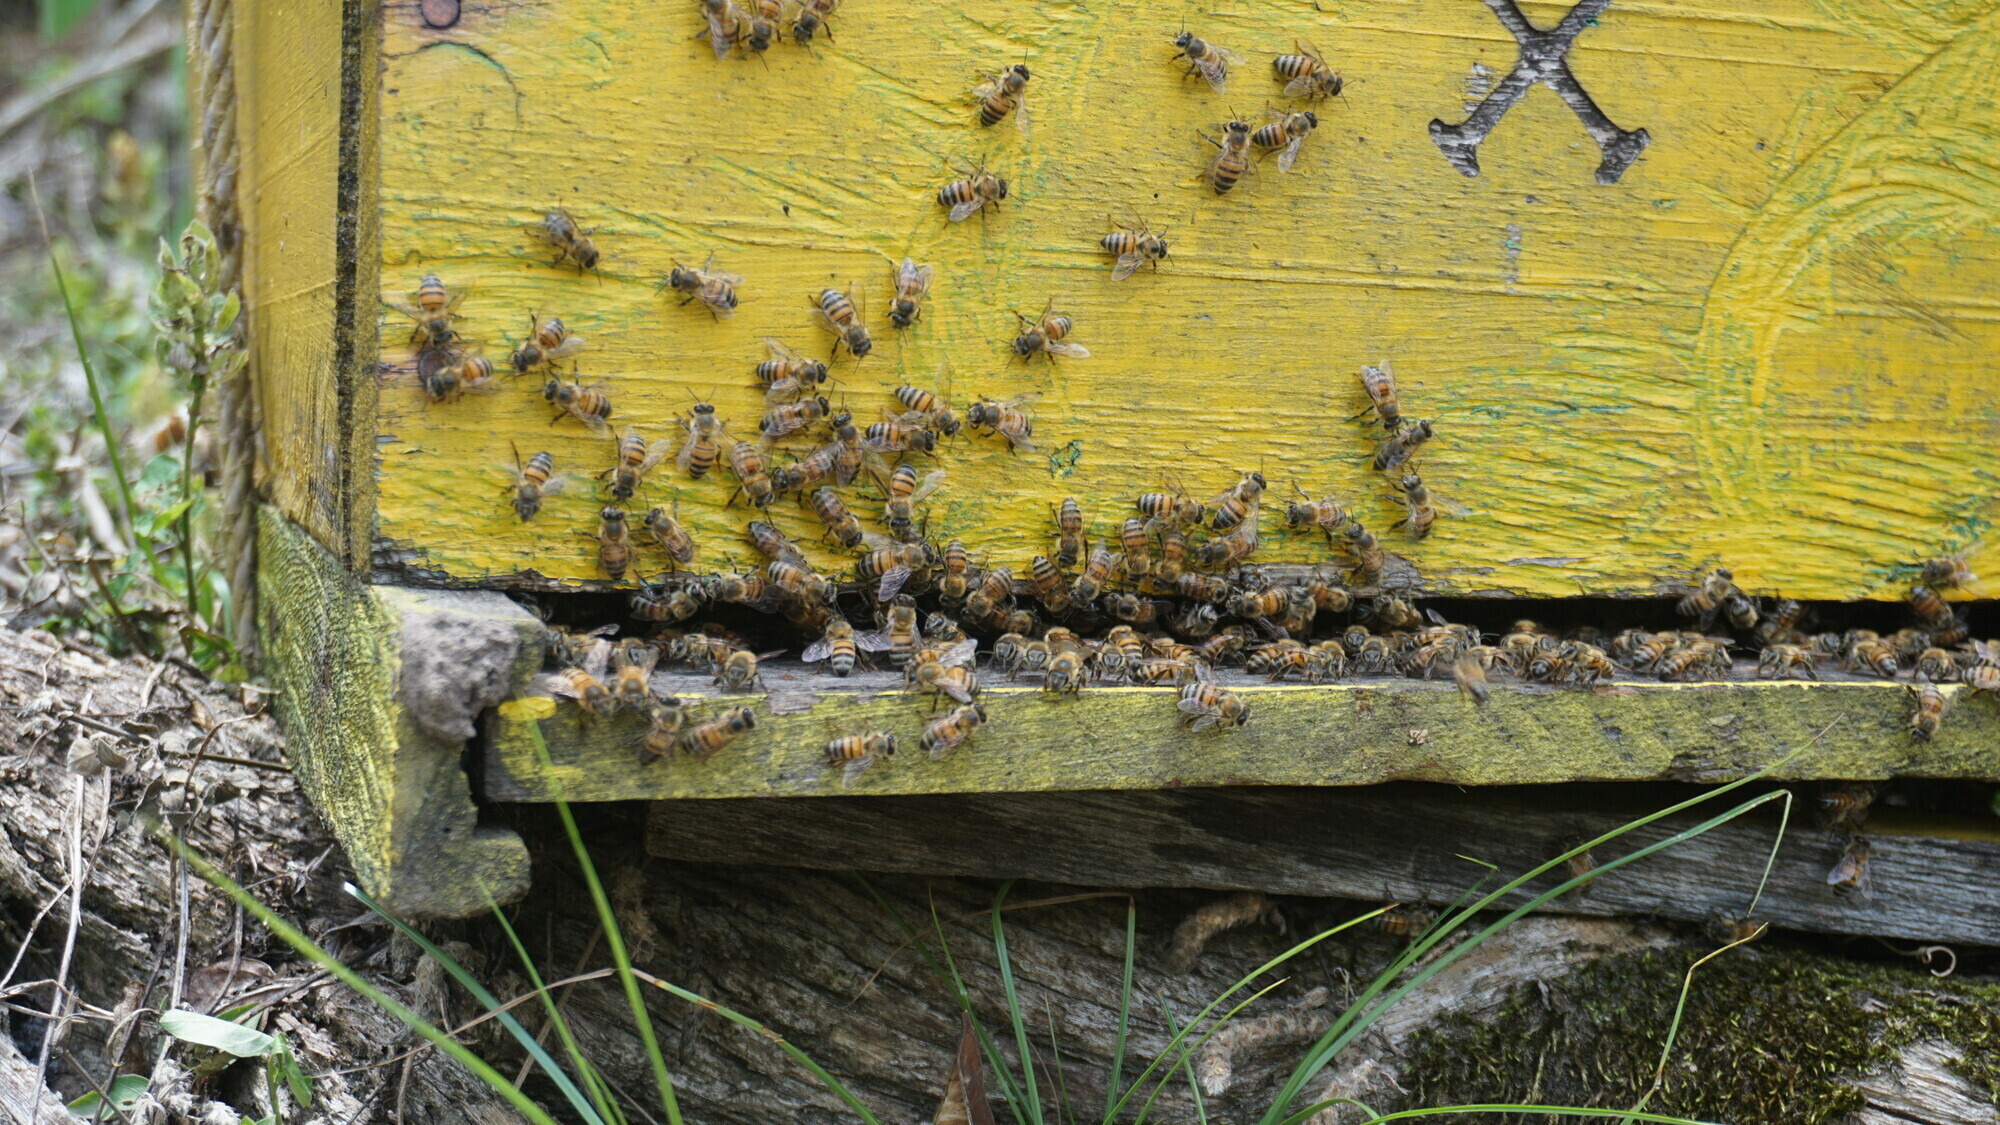 Bees coming out of their hive